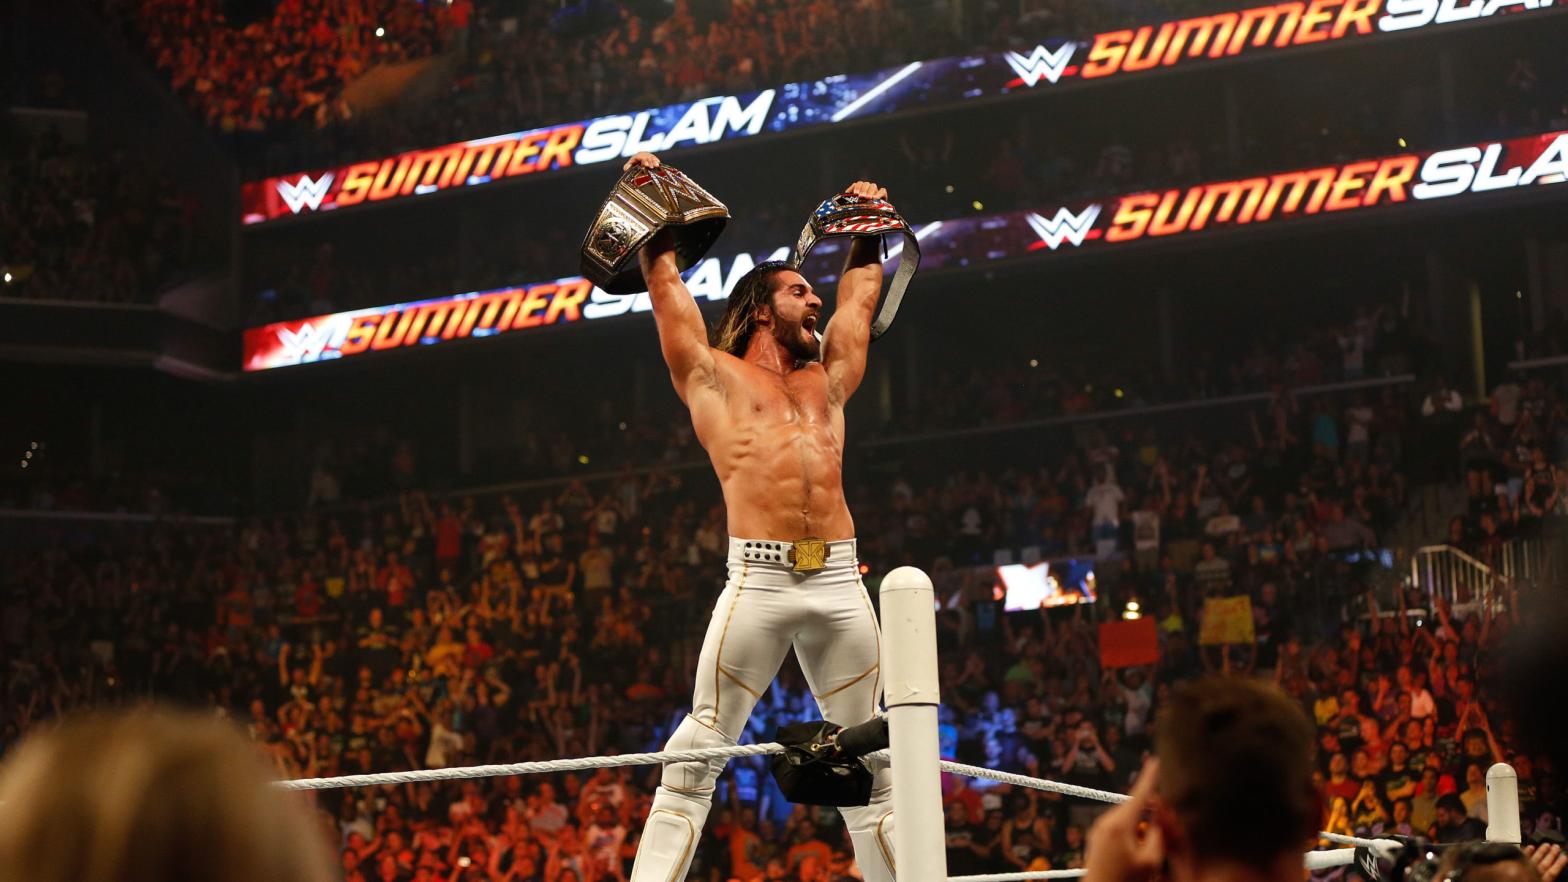 Seth Rollins celebrates his victory over John Cena at the WWE SummerSlam 2015 at Barclays Centre of Brooklyn on August 23, 2015 in New York City.  (Photo: JP Yim, Getty Images)